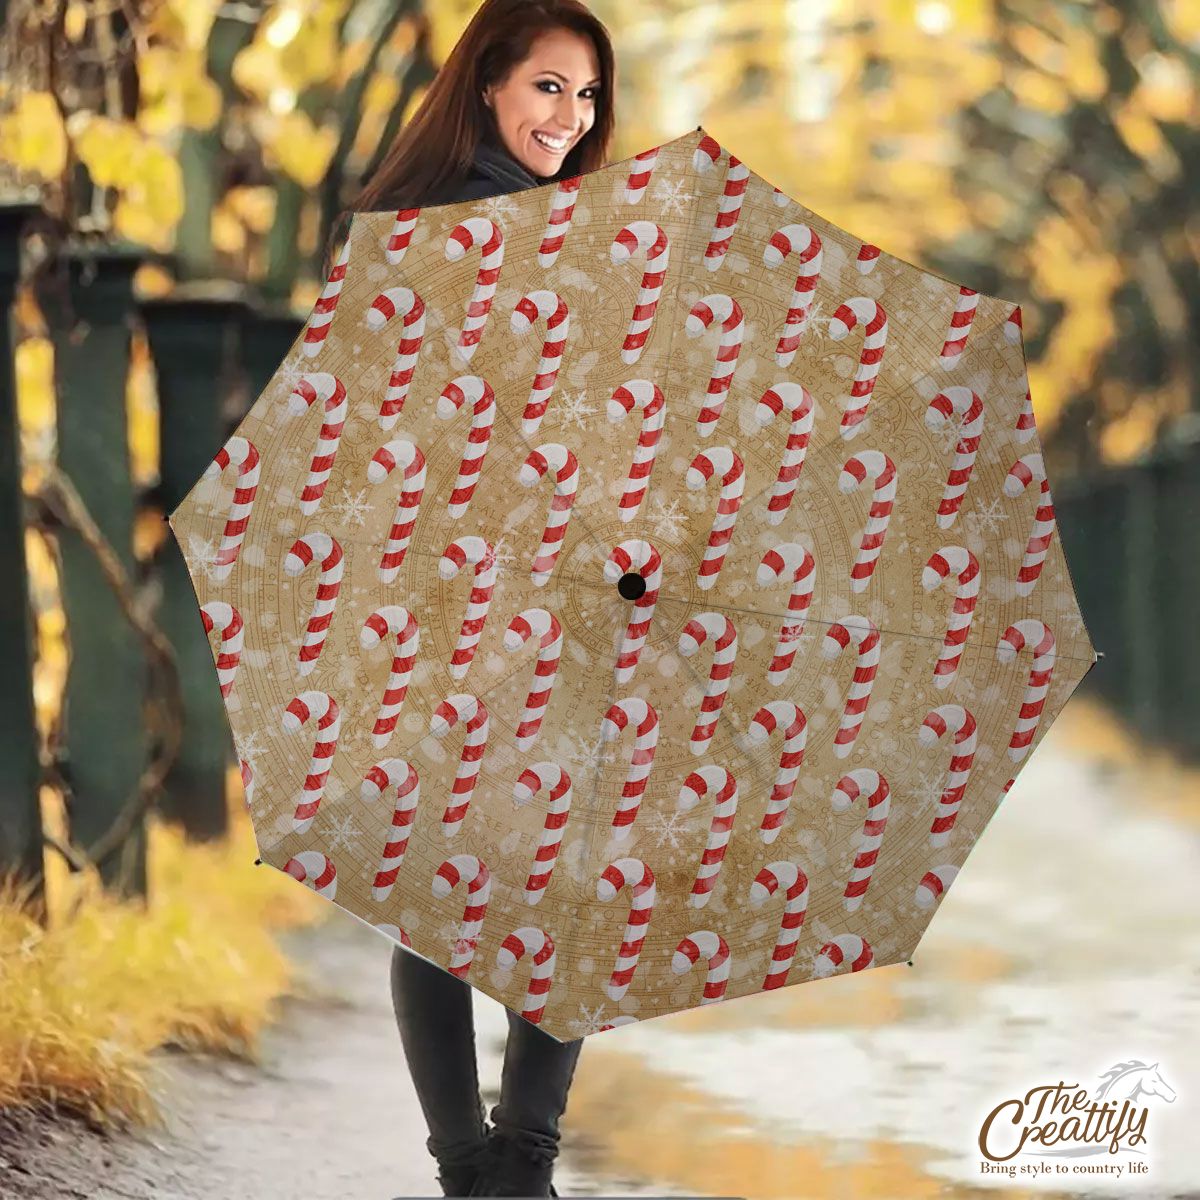 Vintage Christmas With Candy Canes Umbrella